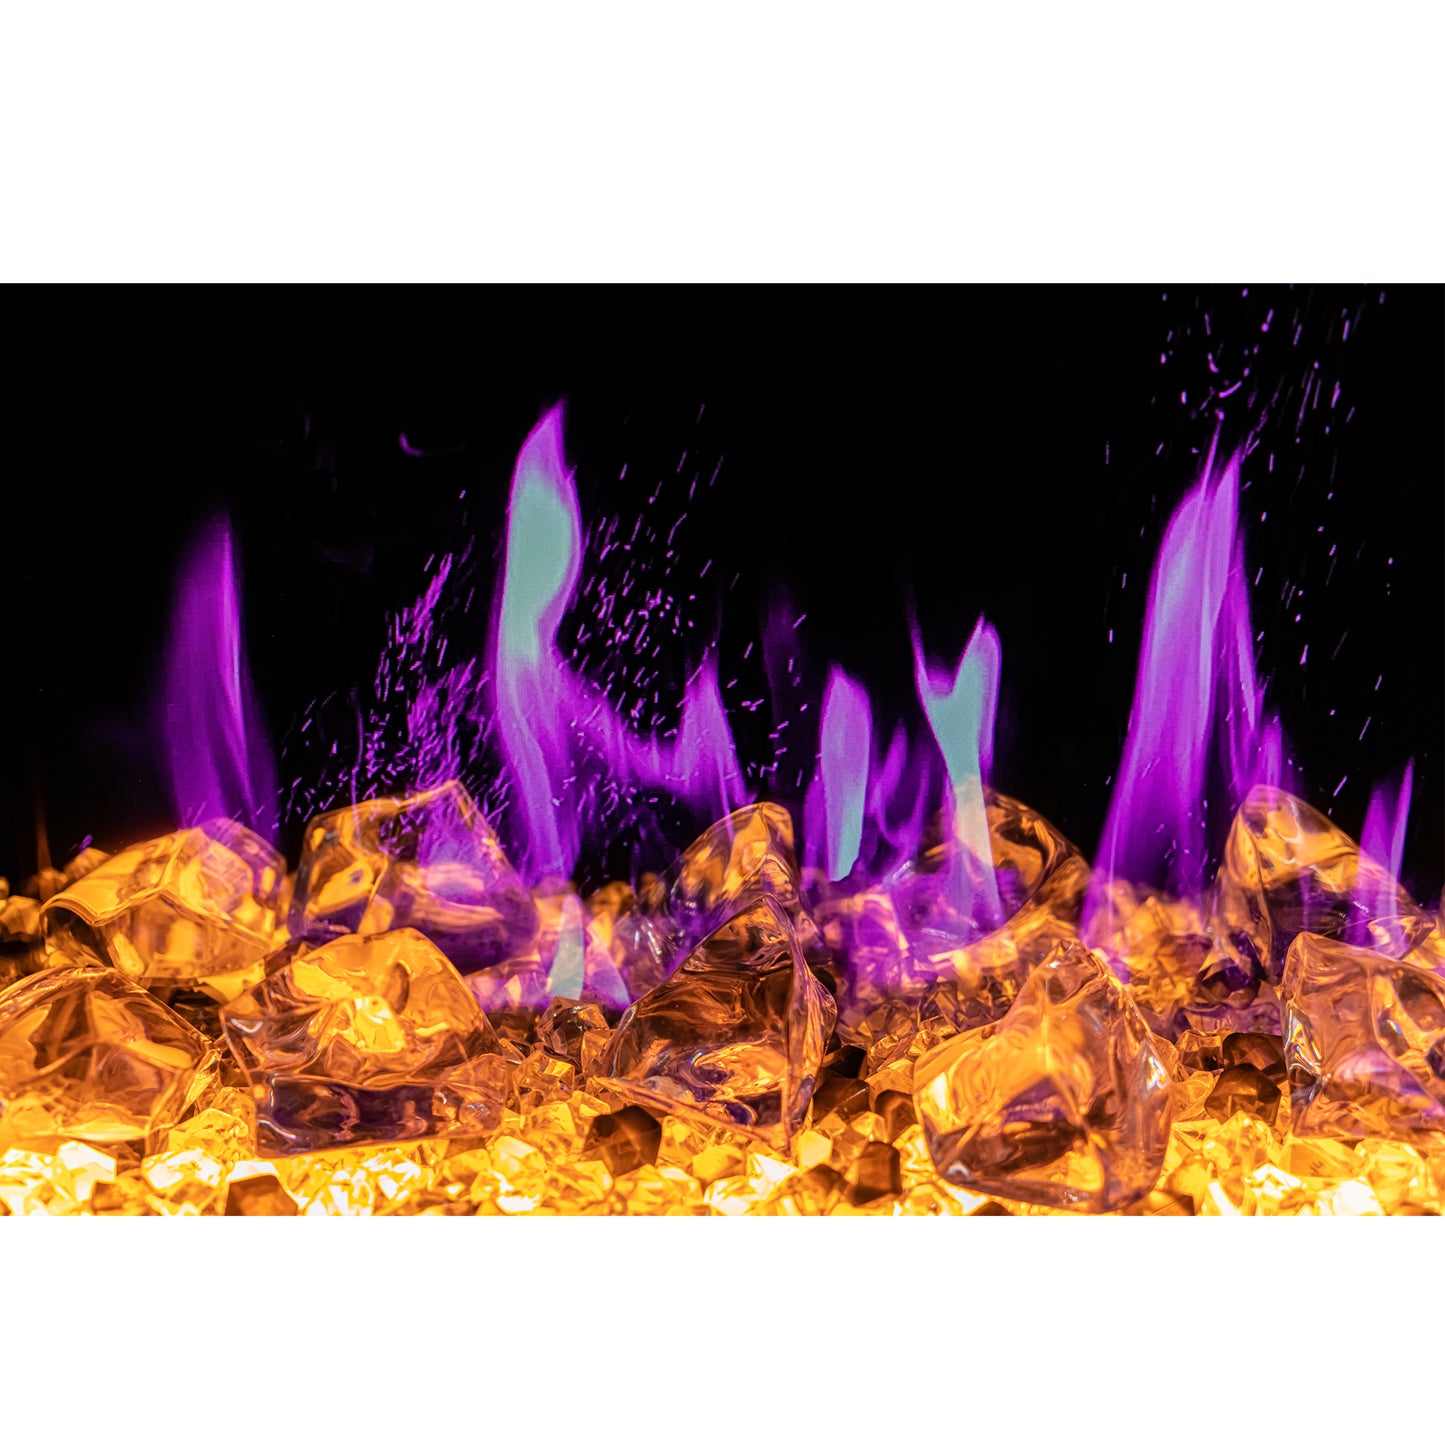 Zopaflame Crystals Decor Media Kit for 45-48 inch fireplace